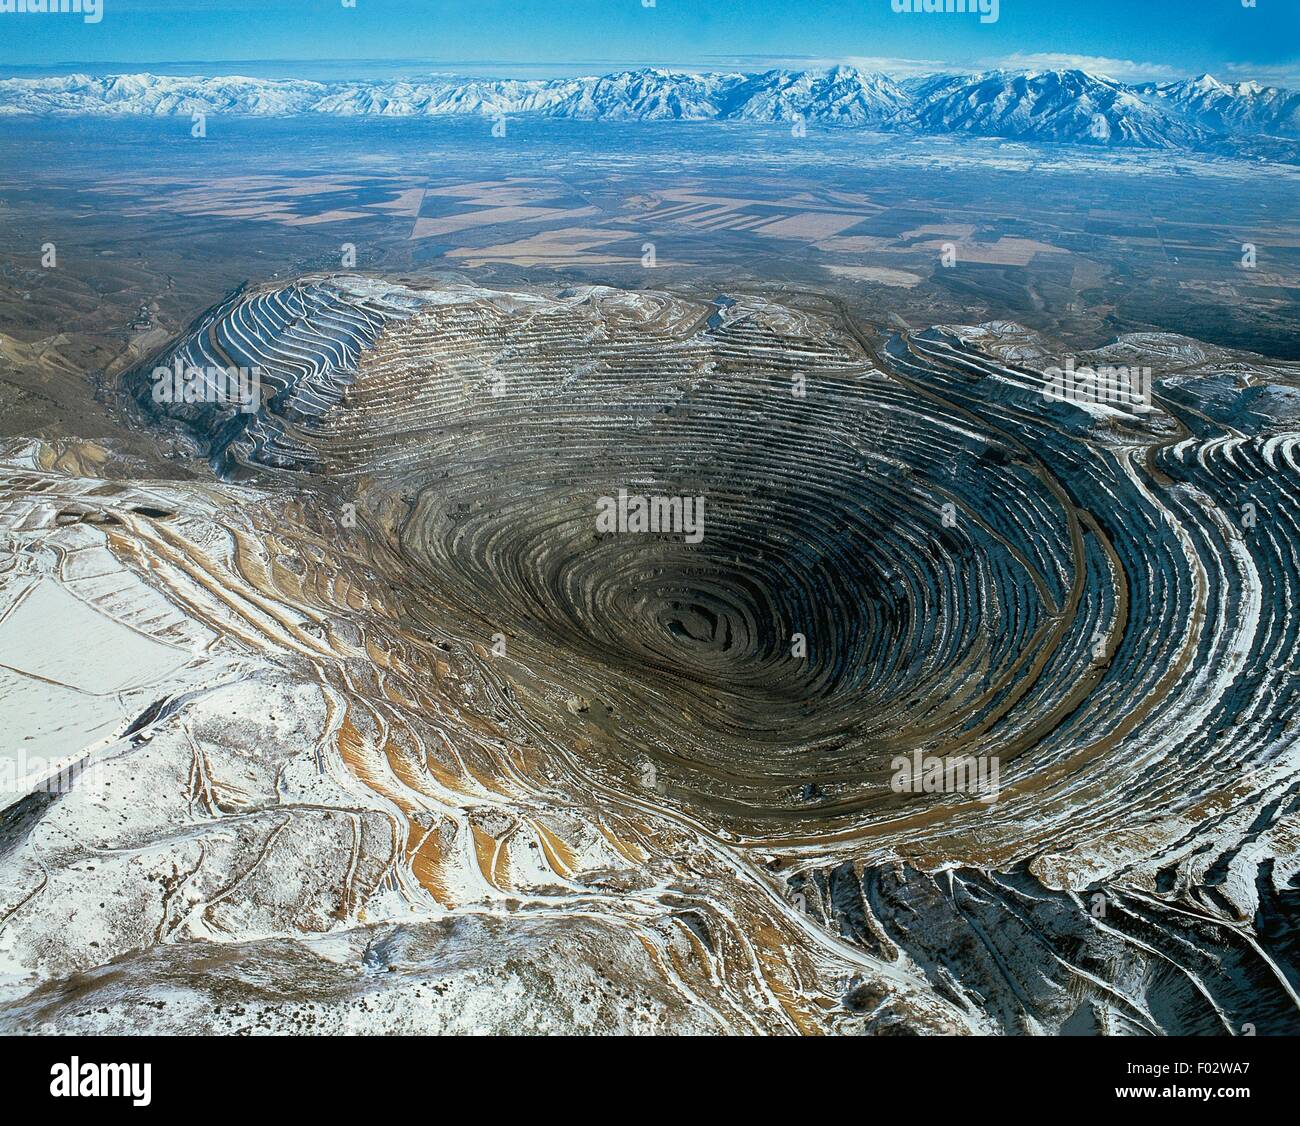 Bingham Canyon Mine Also Known As The Kennecott Copper Mine Utah United States Of America Stock Photo Alamy